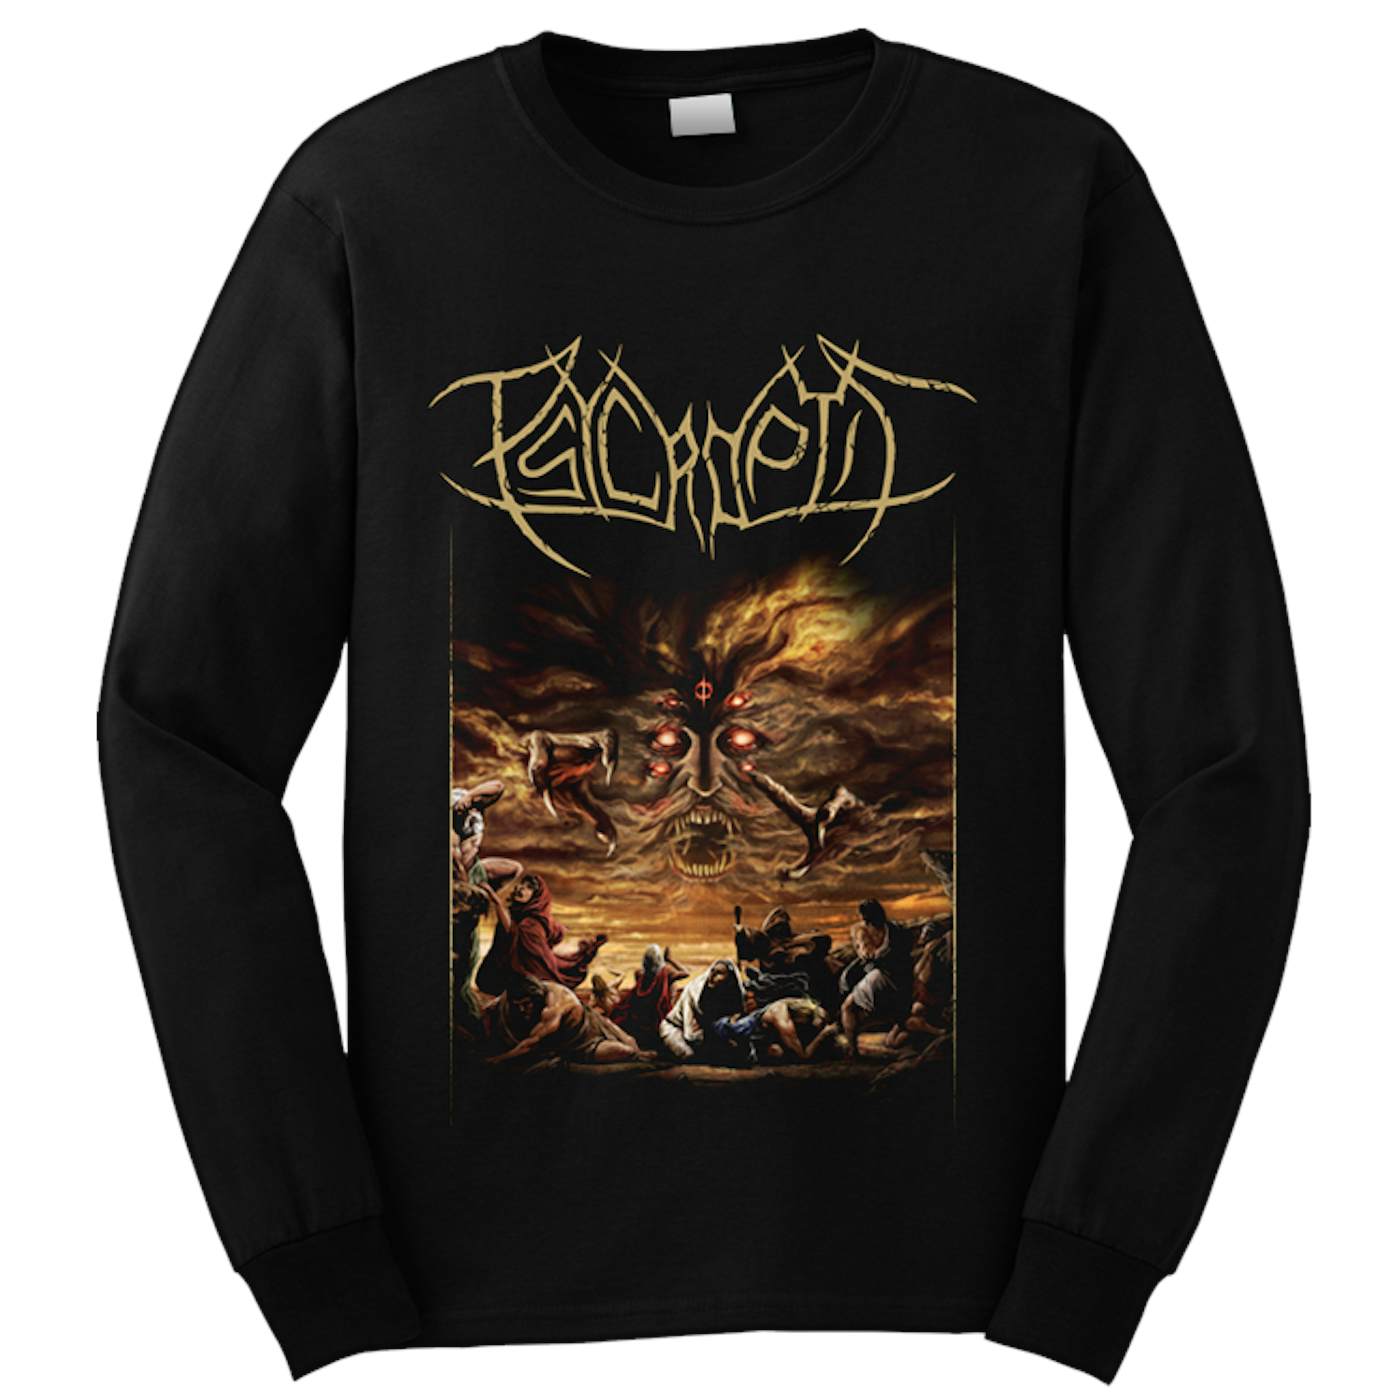 PSYCROPTIC - 'The Watcher Of All' Long Sleeve